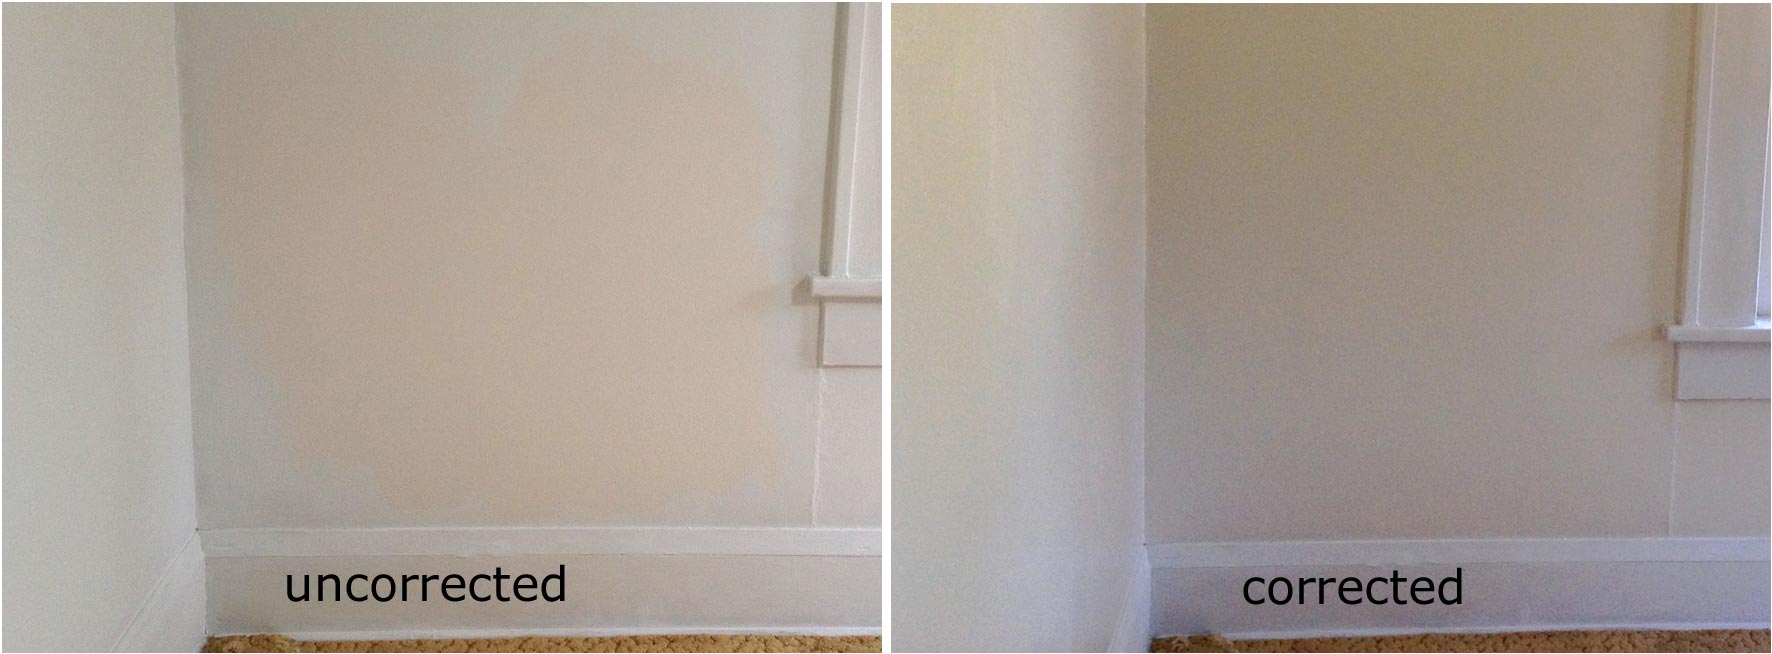 Two images: left uncorrected beige paint, on right corrected to proper shade